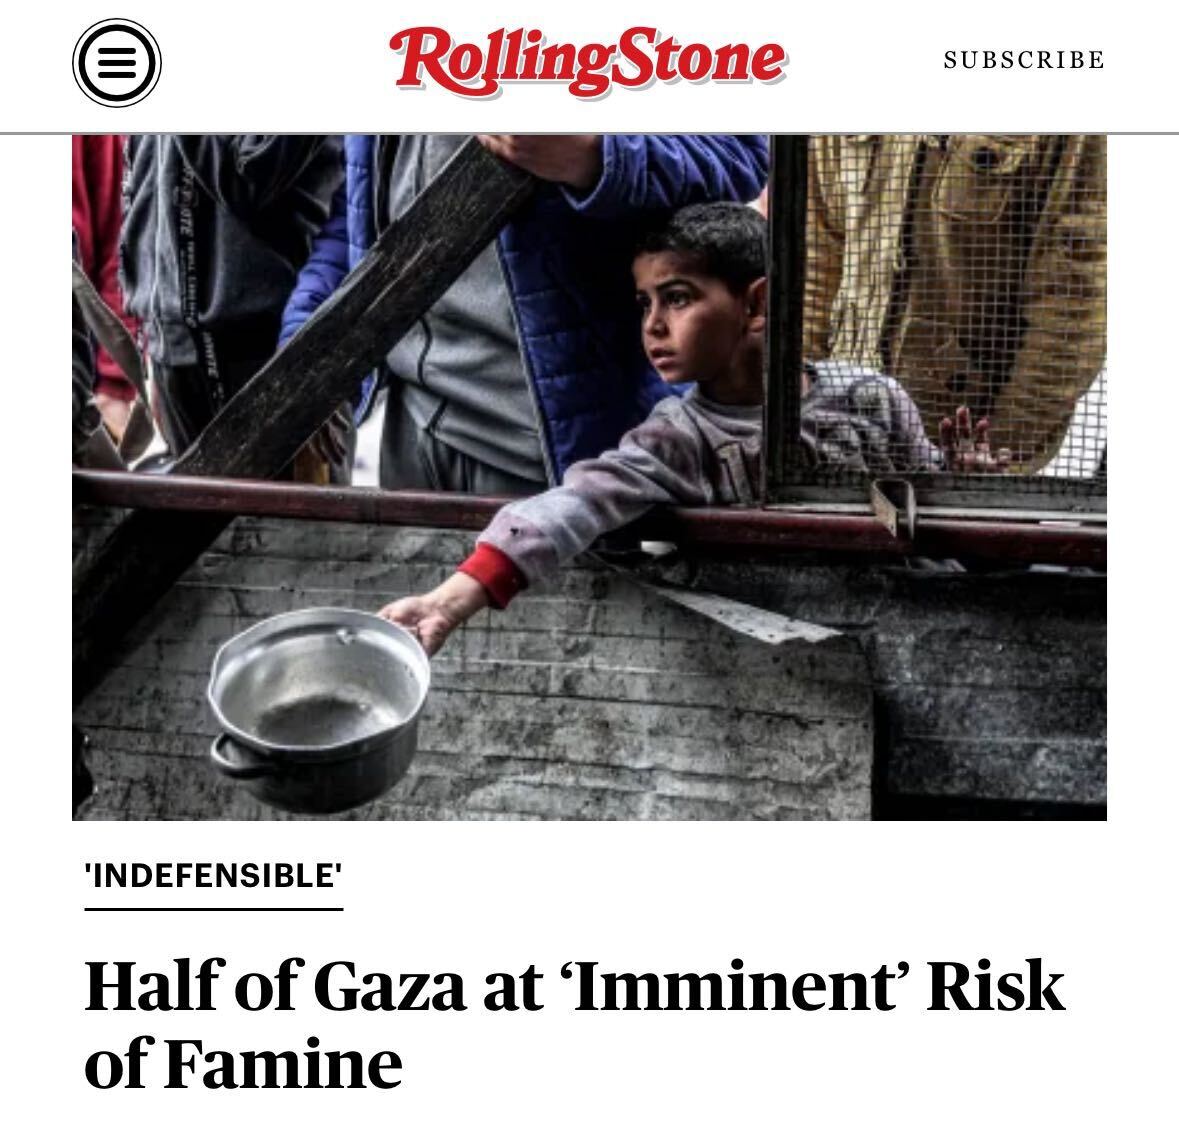 A leading humanitarian monitoring system warned Monday that half of Gaza’s population is at “imminent” risk of famine. Story: rollingstone.com/politics/polit…